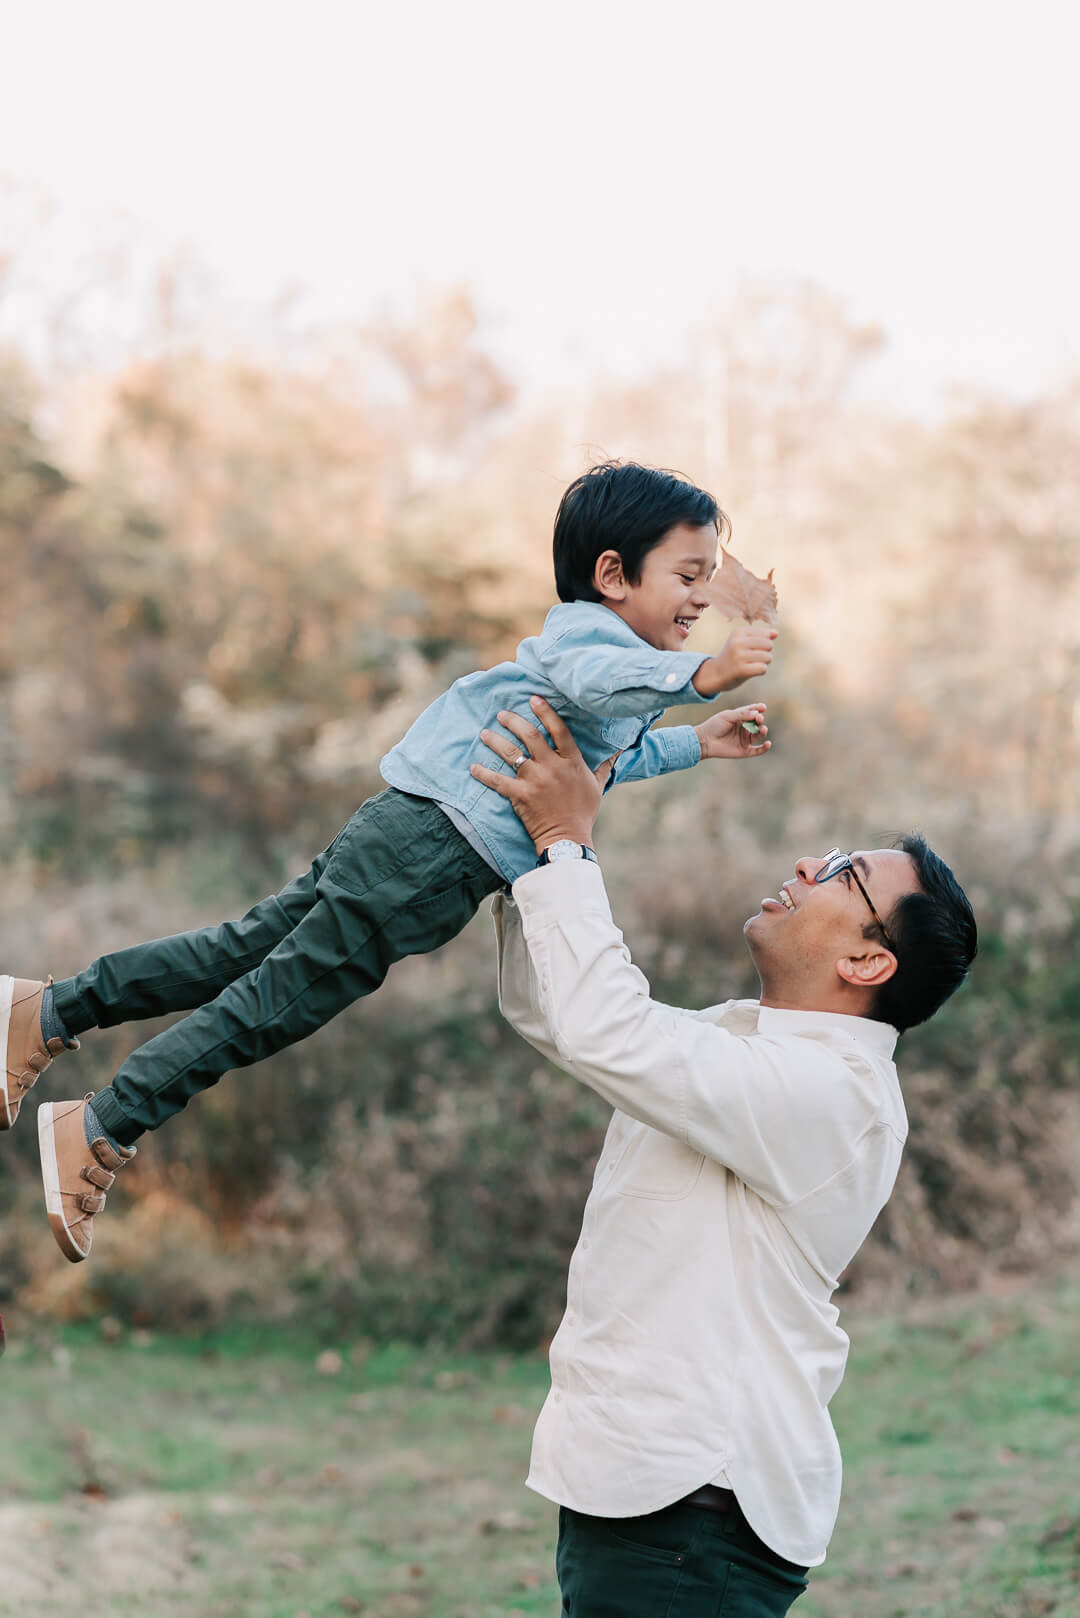 A happy father lifts and tosses his toddler son in the air in a park at sunset